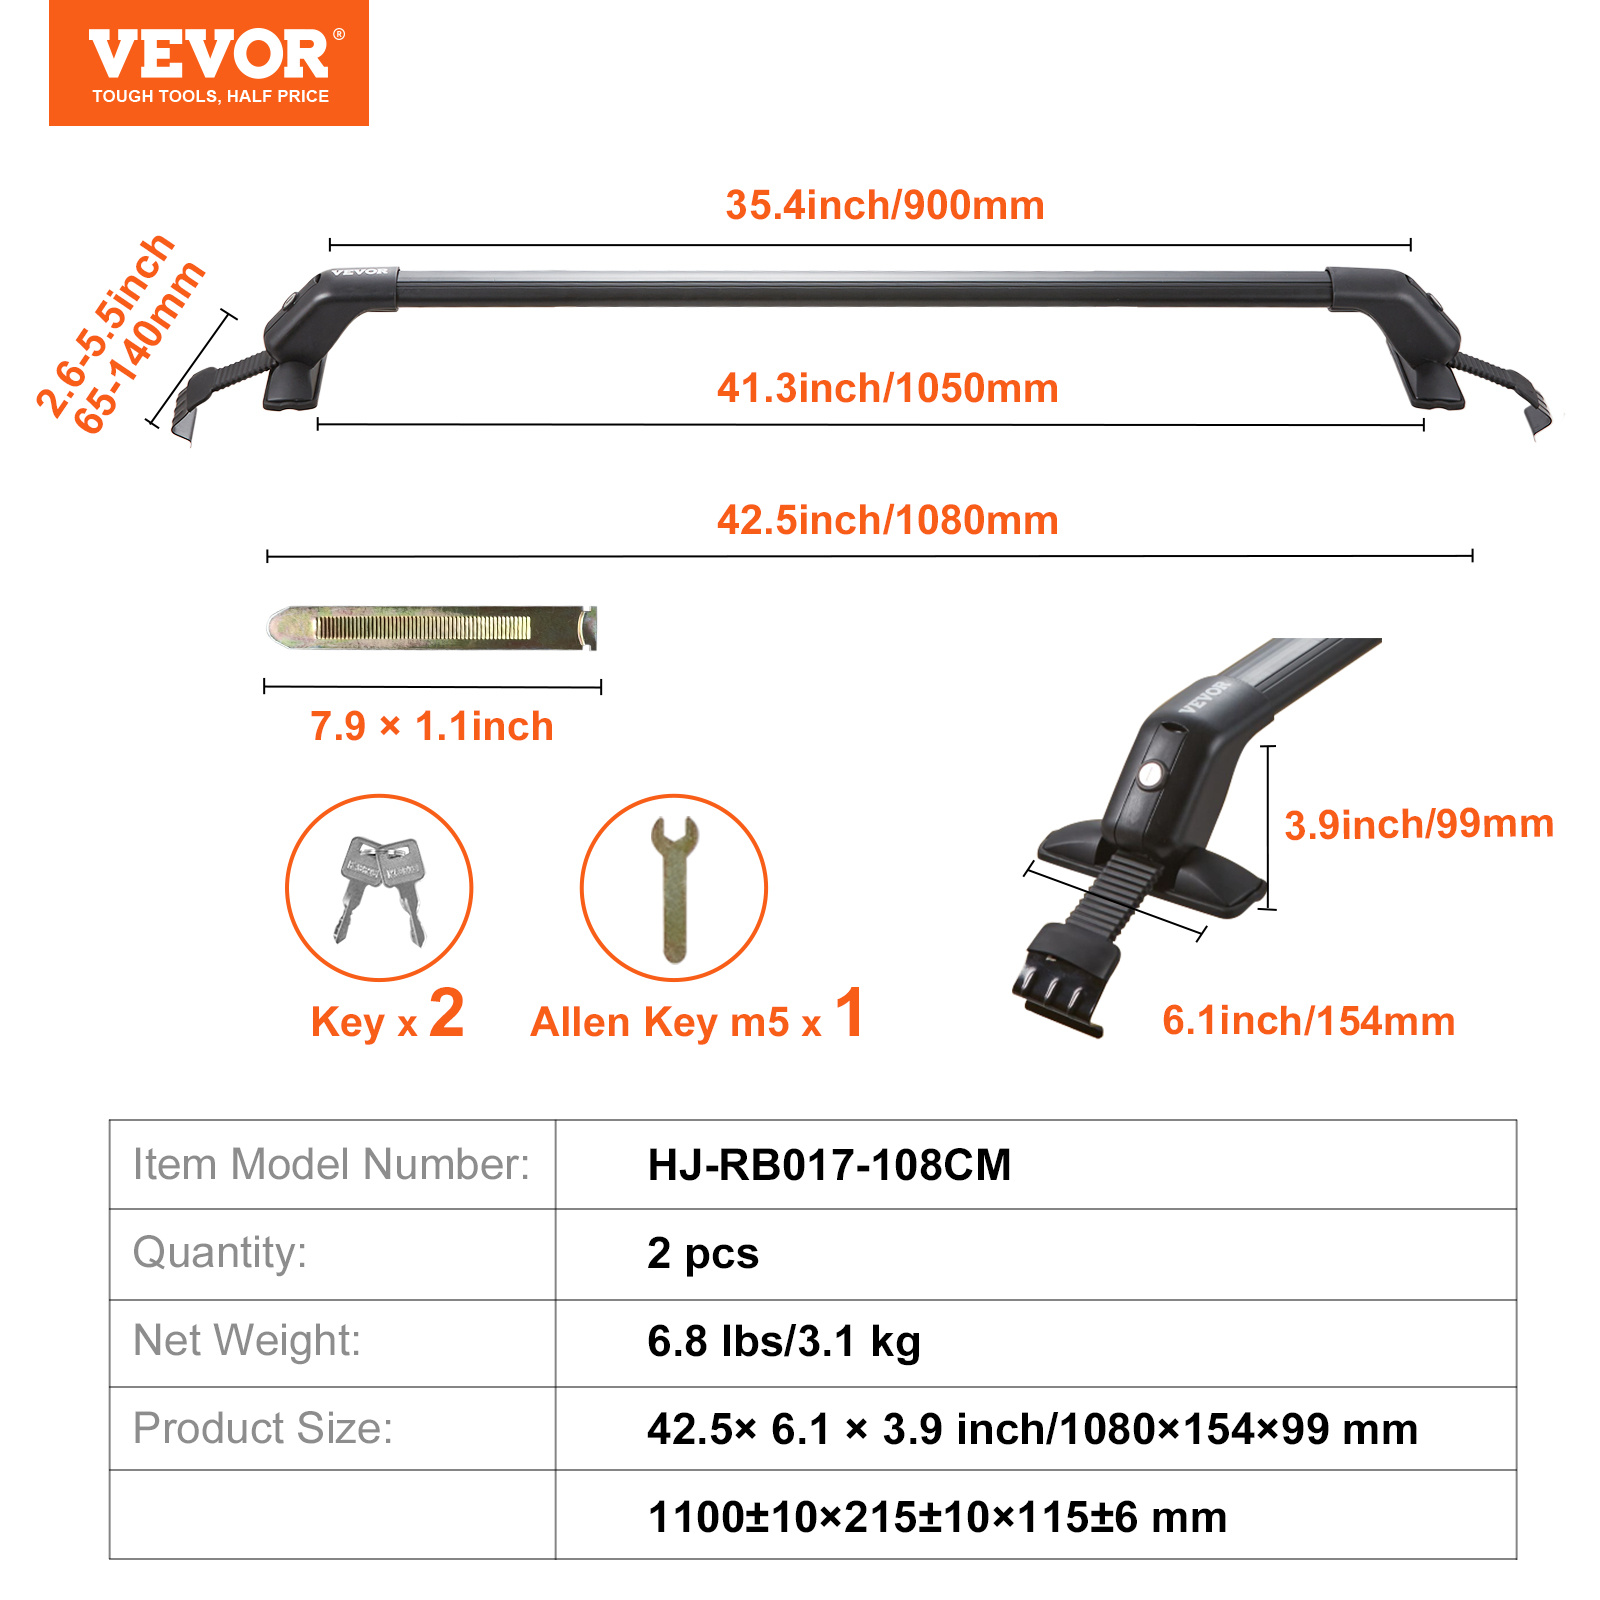 

Vevor Universal Roof Rack Cross Bars, 41.3" Aluminum Roof Rack Crossbars, Fit Roof Without Side Rail, 155 Lbs Load Capacity, Adjustable Bare Roof Crossbars With Locks, For Suvs, Sedans, And